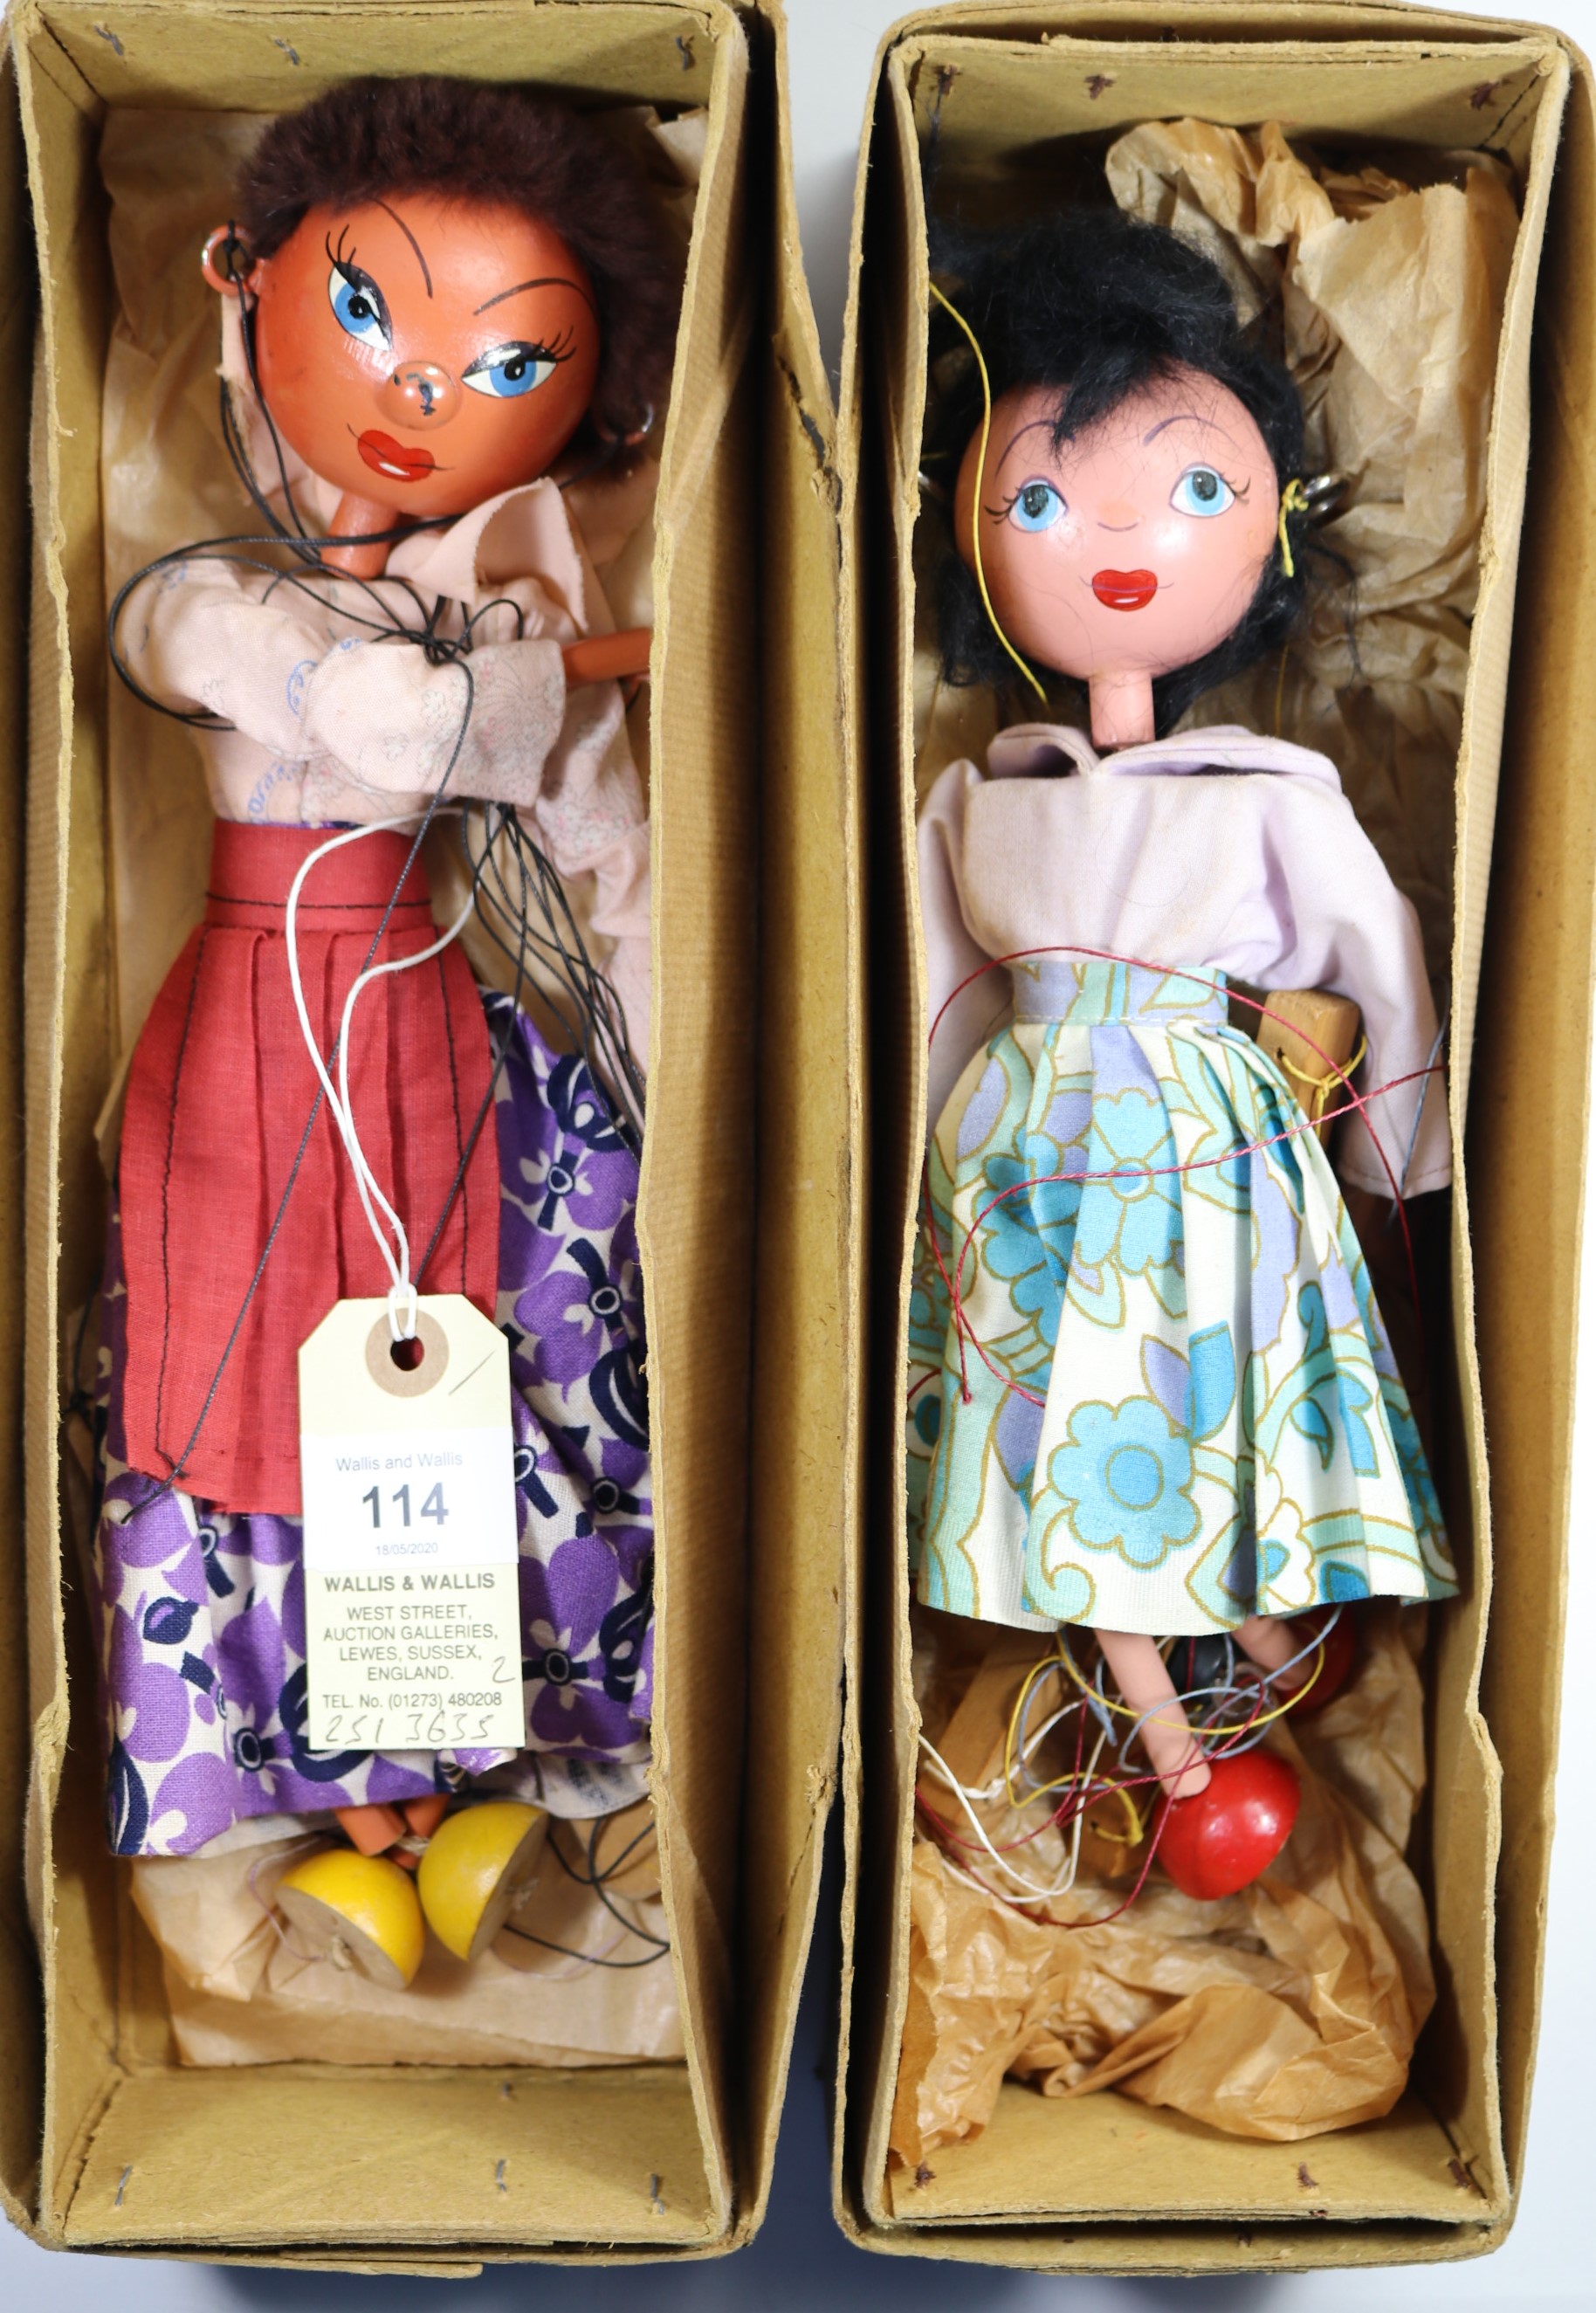 2 early Pelham Puppets. A Mexican style lady with white and purple flower style dress, deep pink